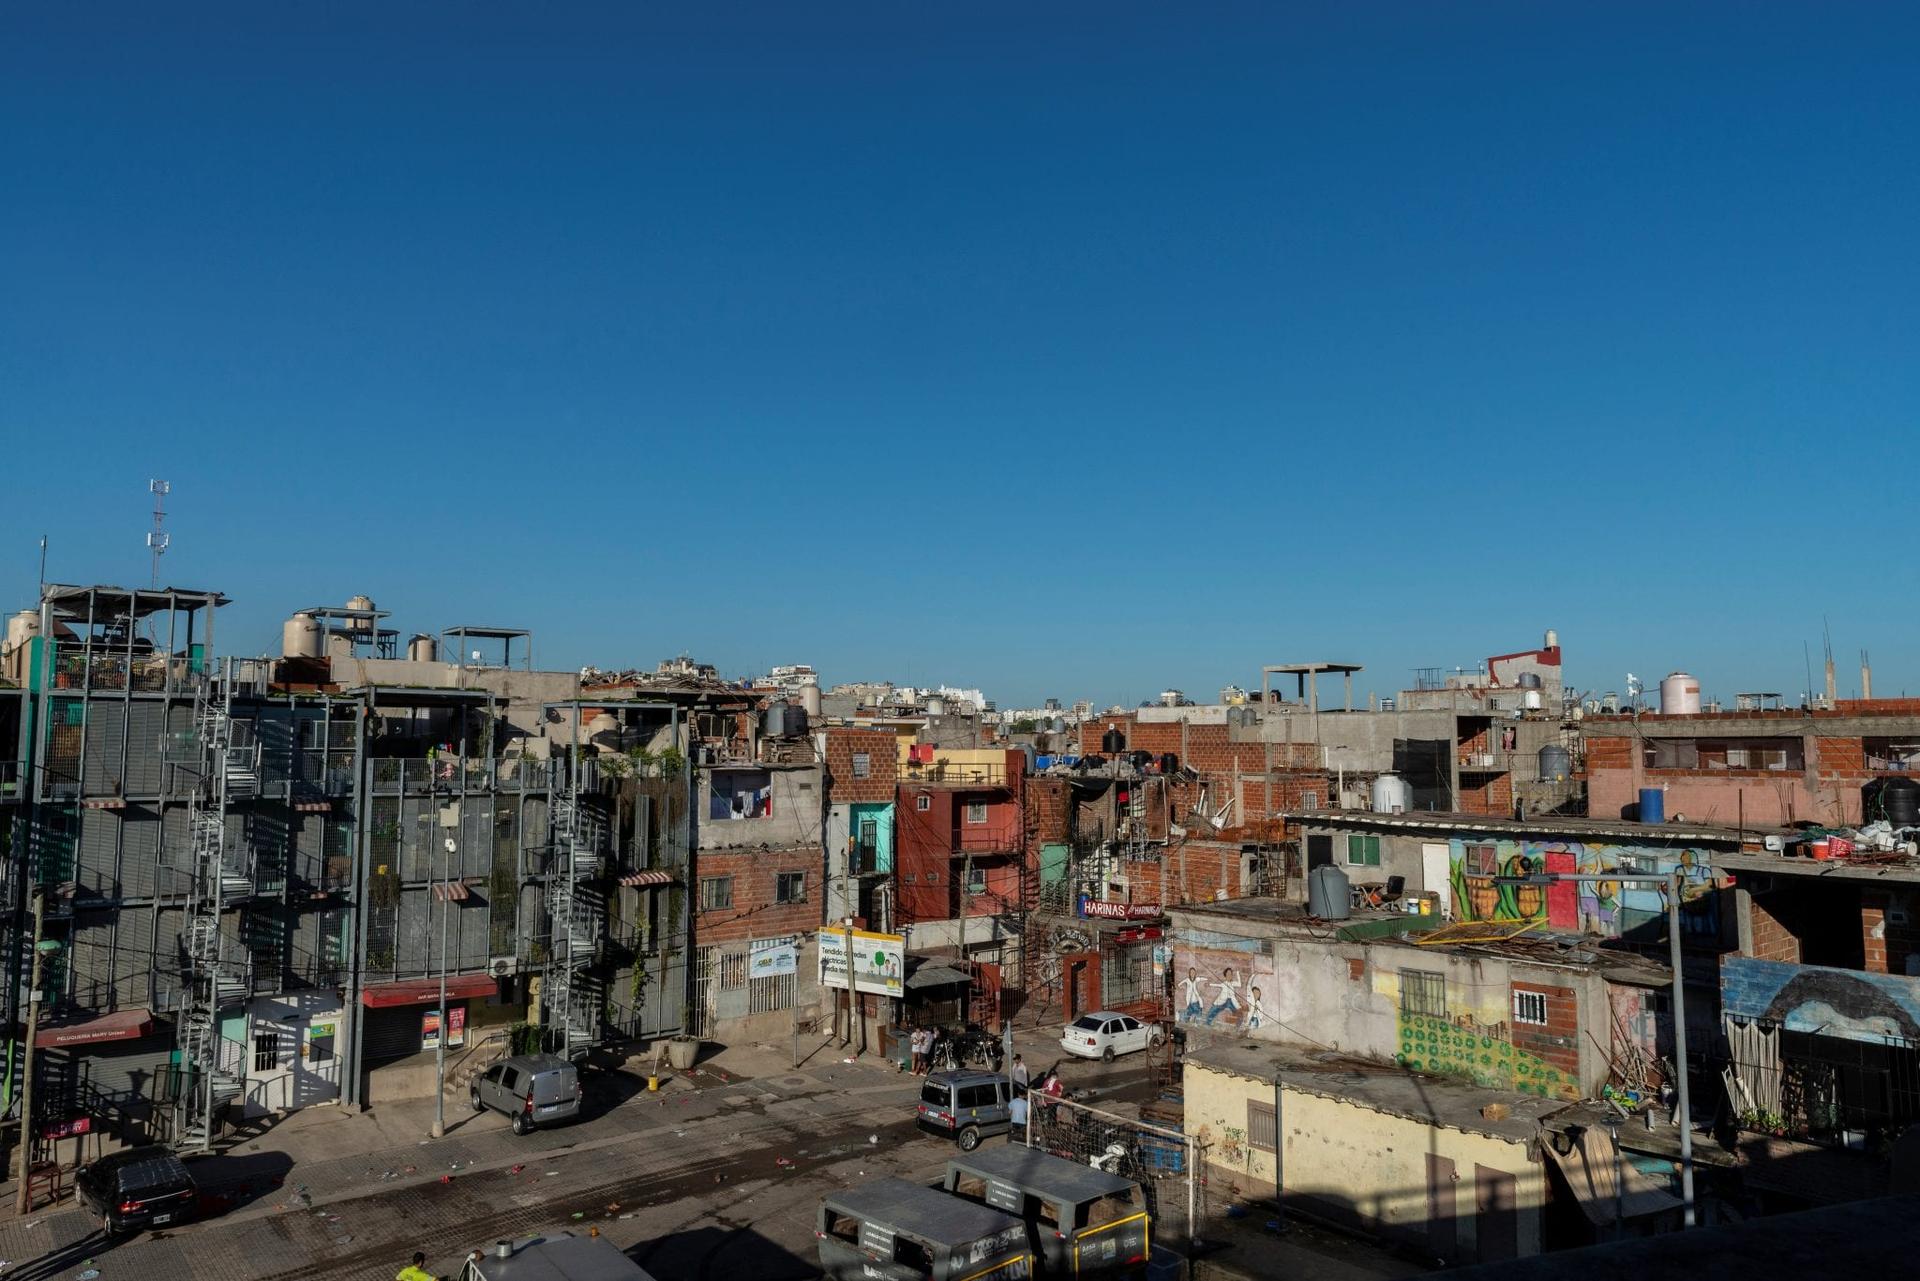 Argentina’s slum priests say after COVID-19, pandemic of hunger, poverty will remain